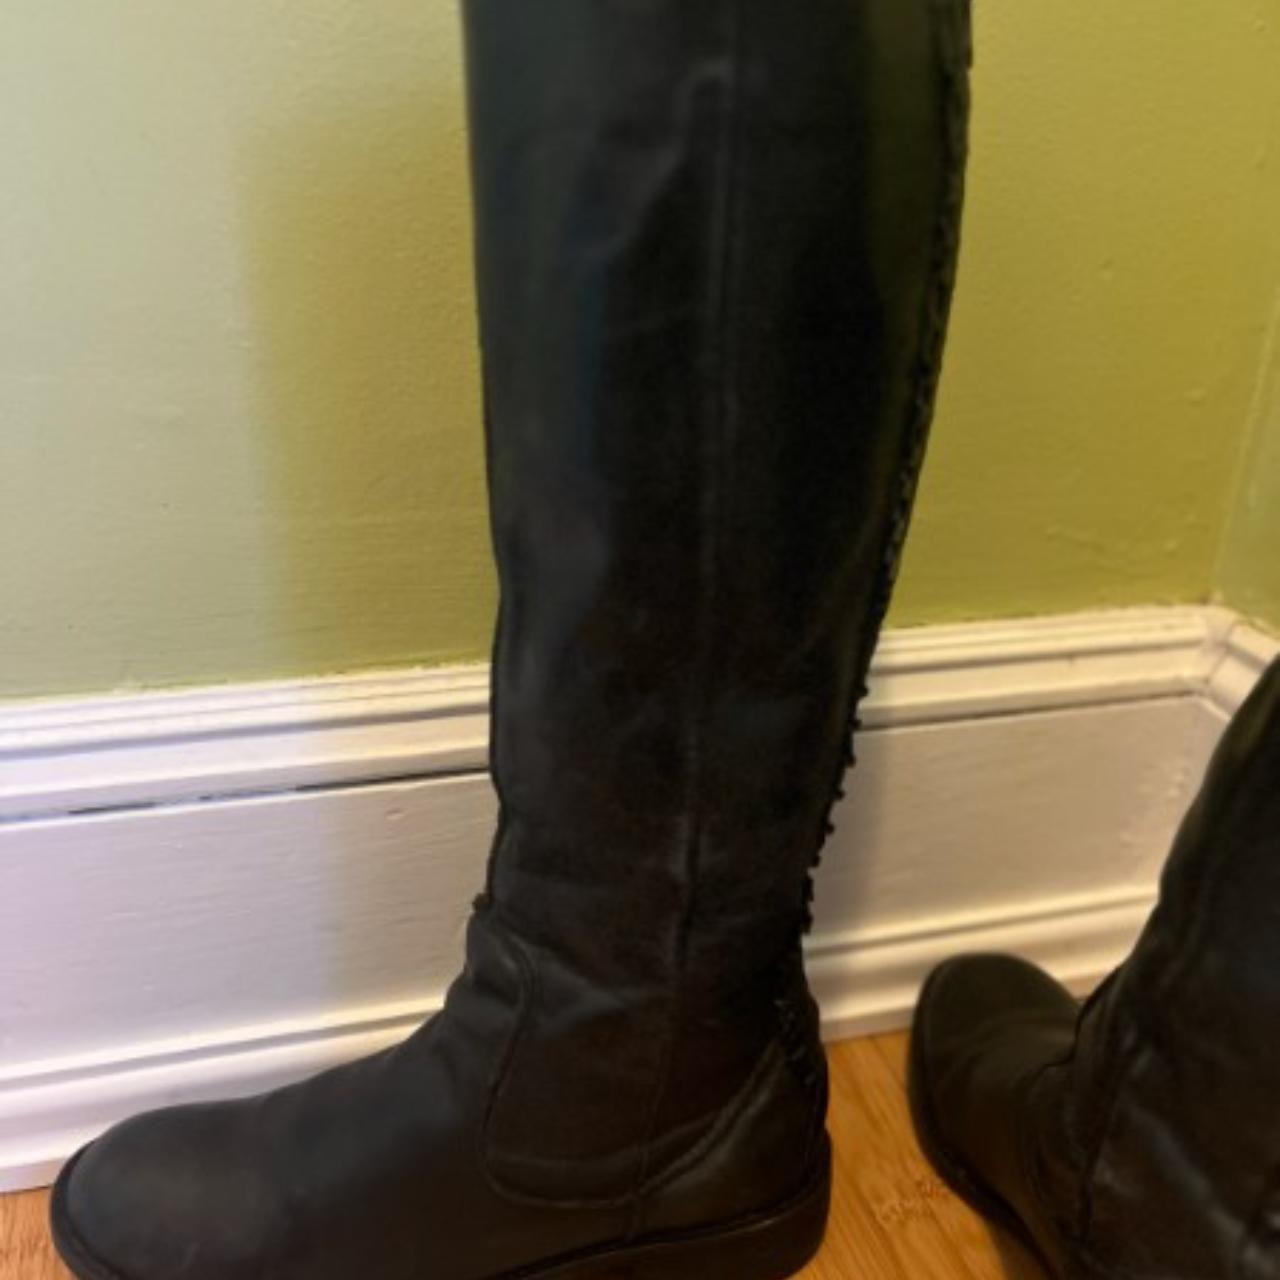 Anthropology Miss Albright Tall Boots Riding Black... - Depop